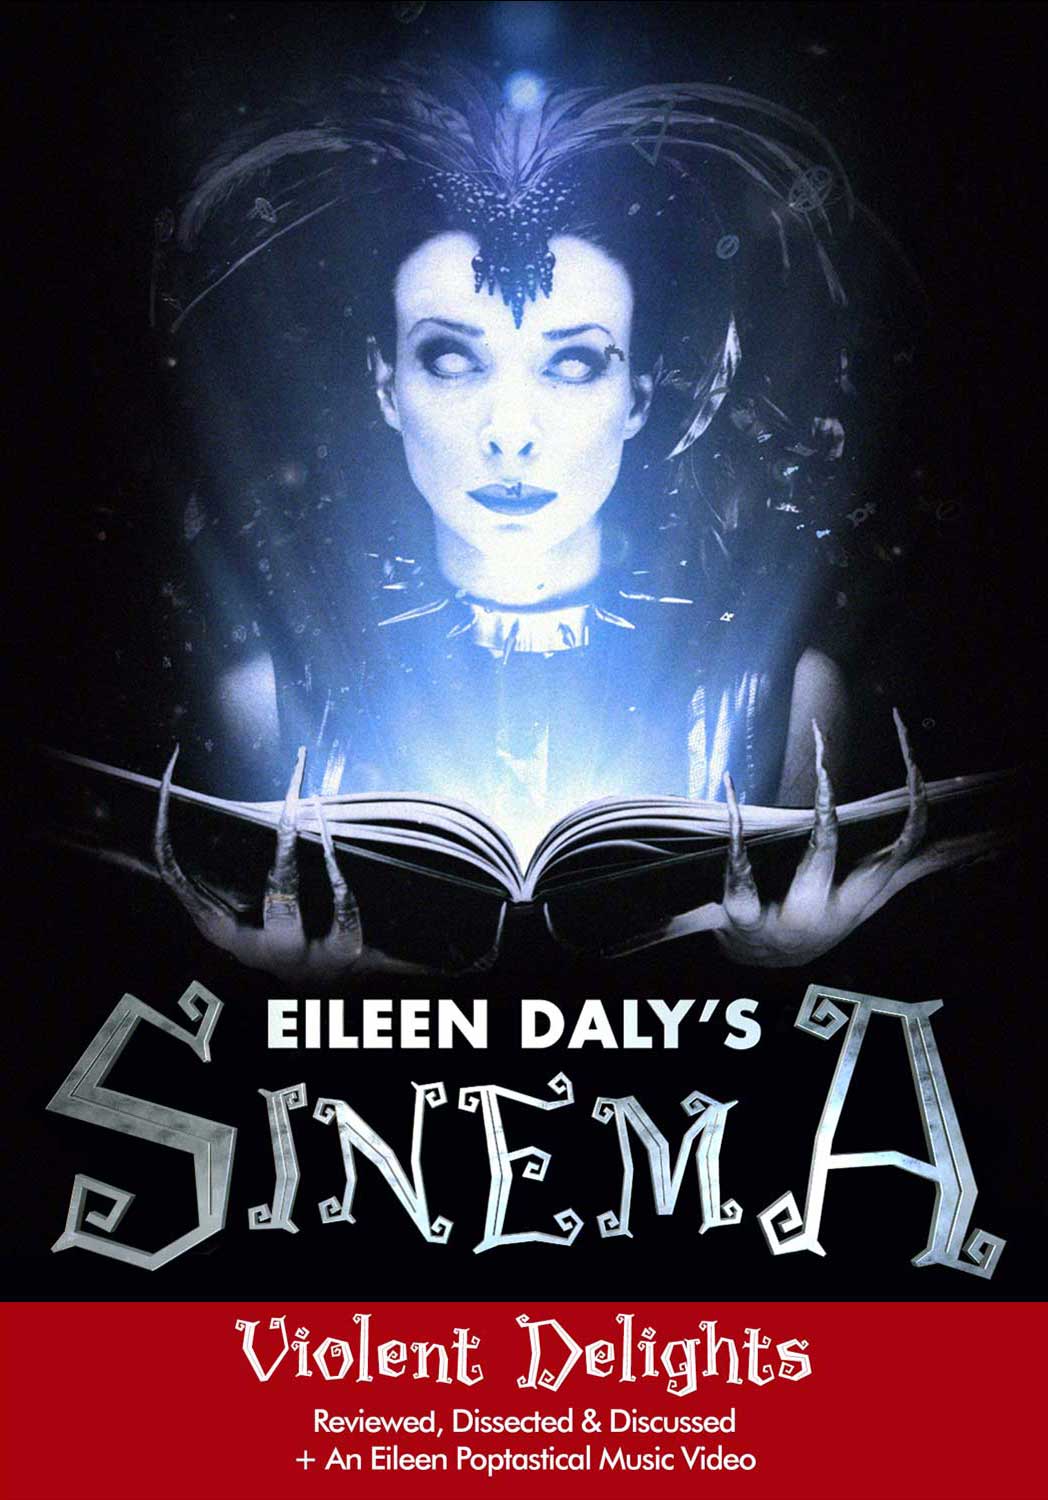 DVD style cover for eipsode 7 of Eileen Daly's series of movie reviews